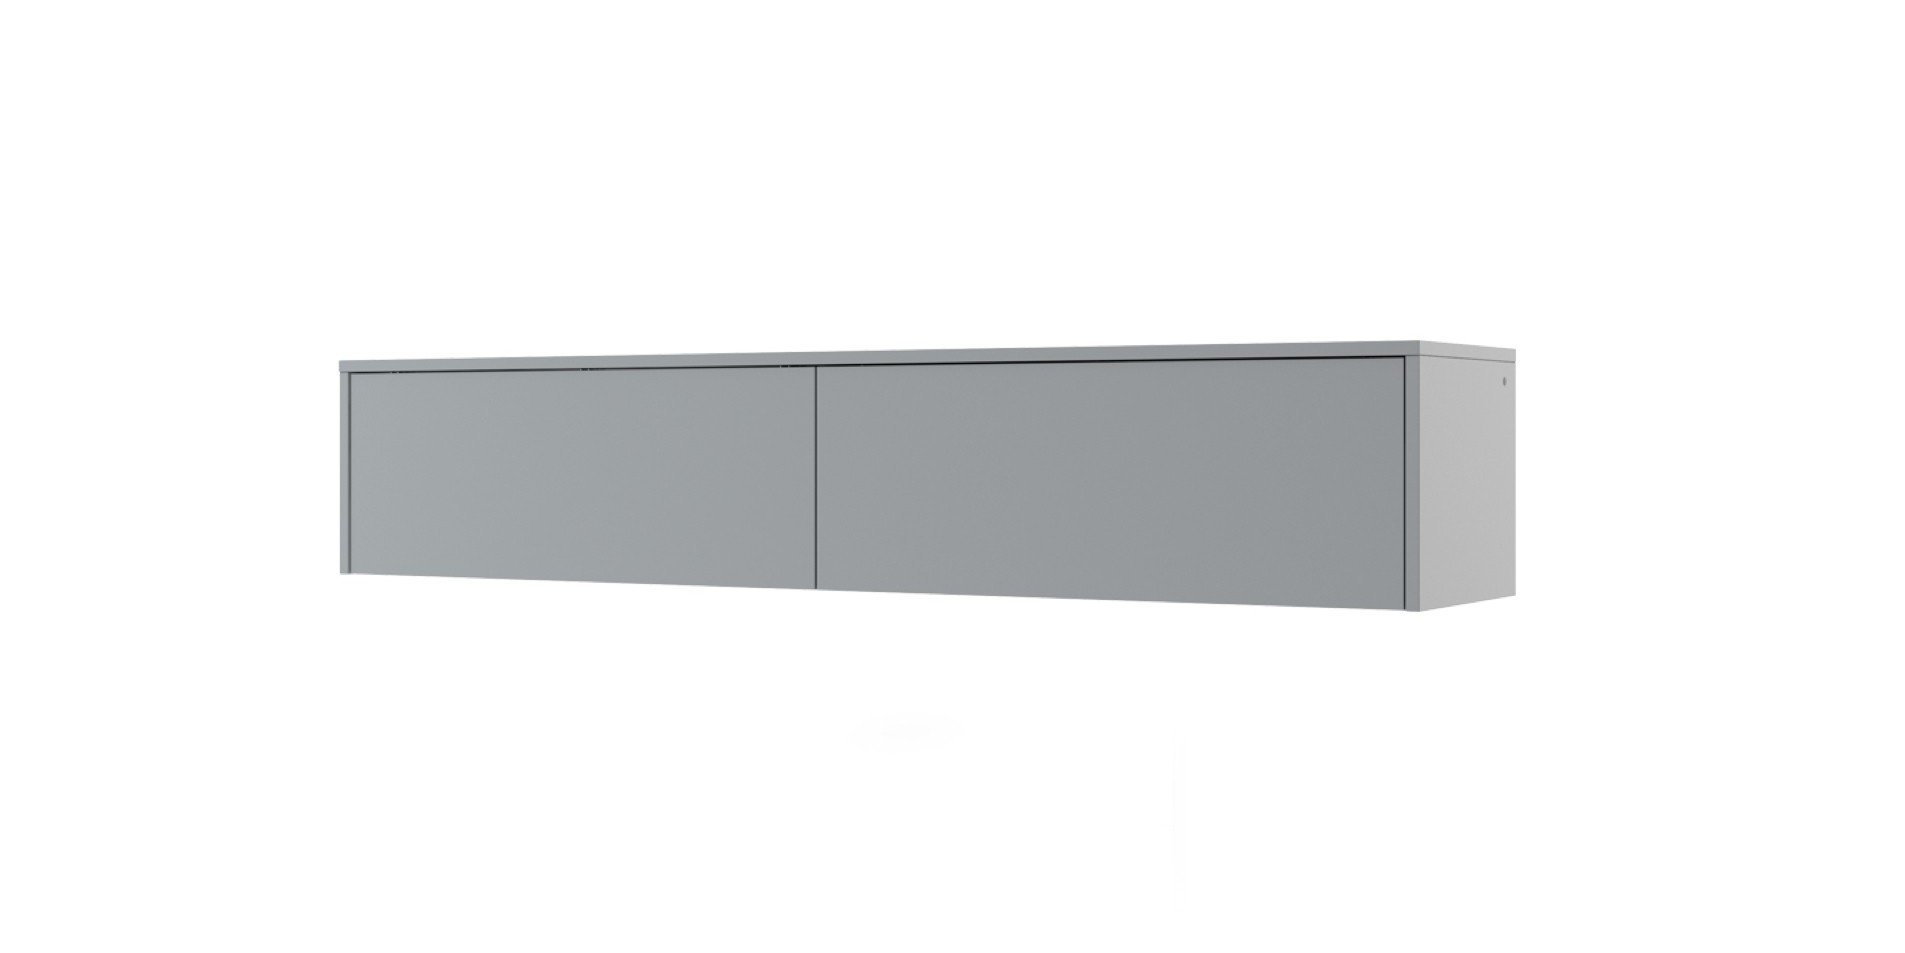 BC-15 Over Bed Unit for Horizontal Wall Bed Concept 160cm Grey Matt Wall Bed with Storage Unit 